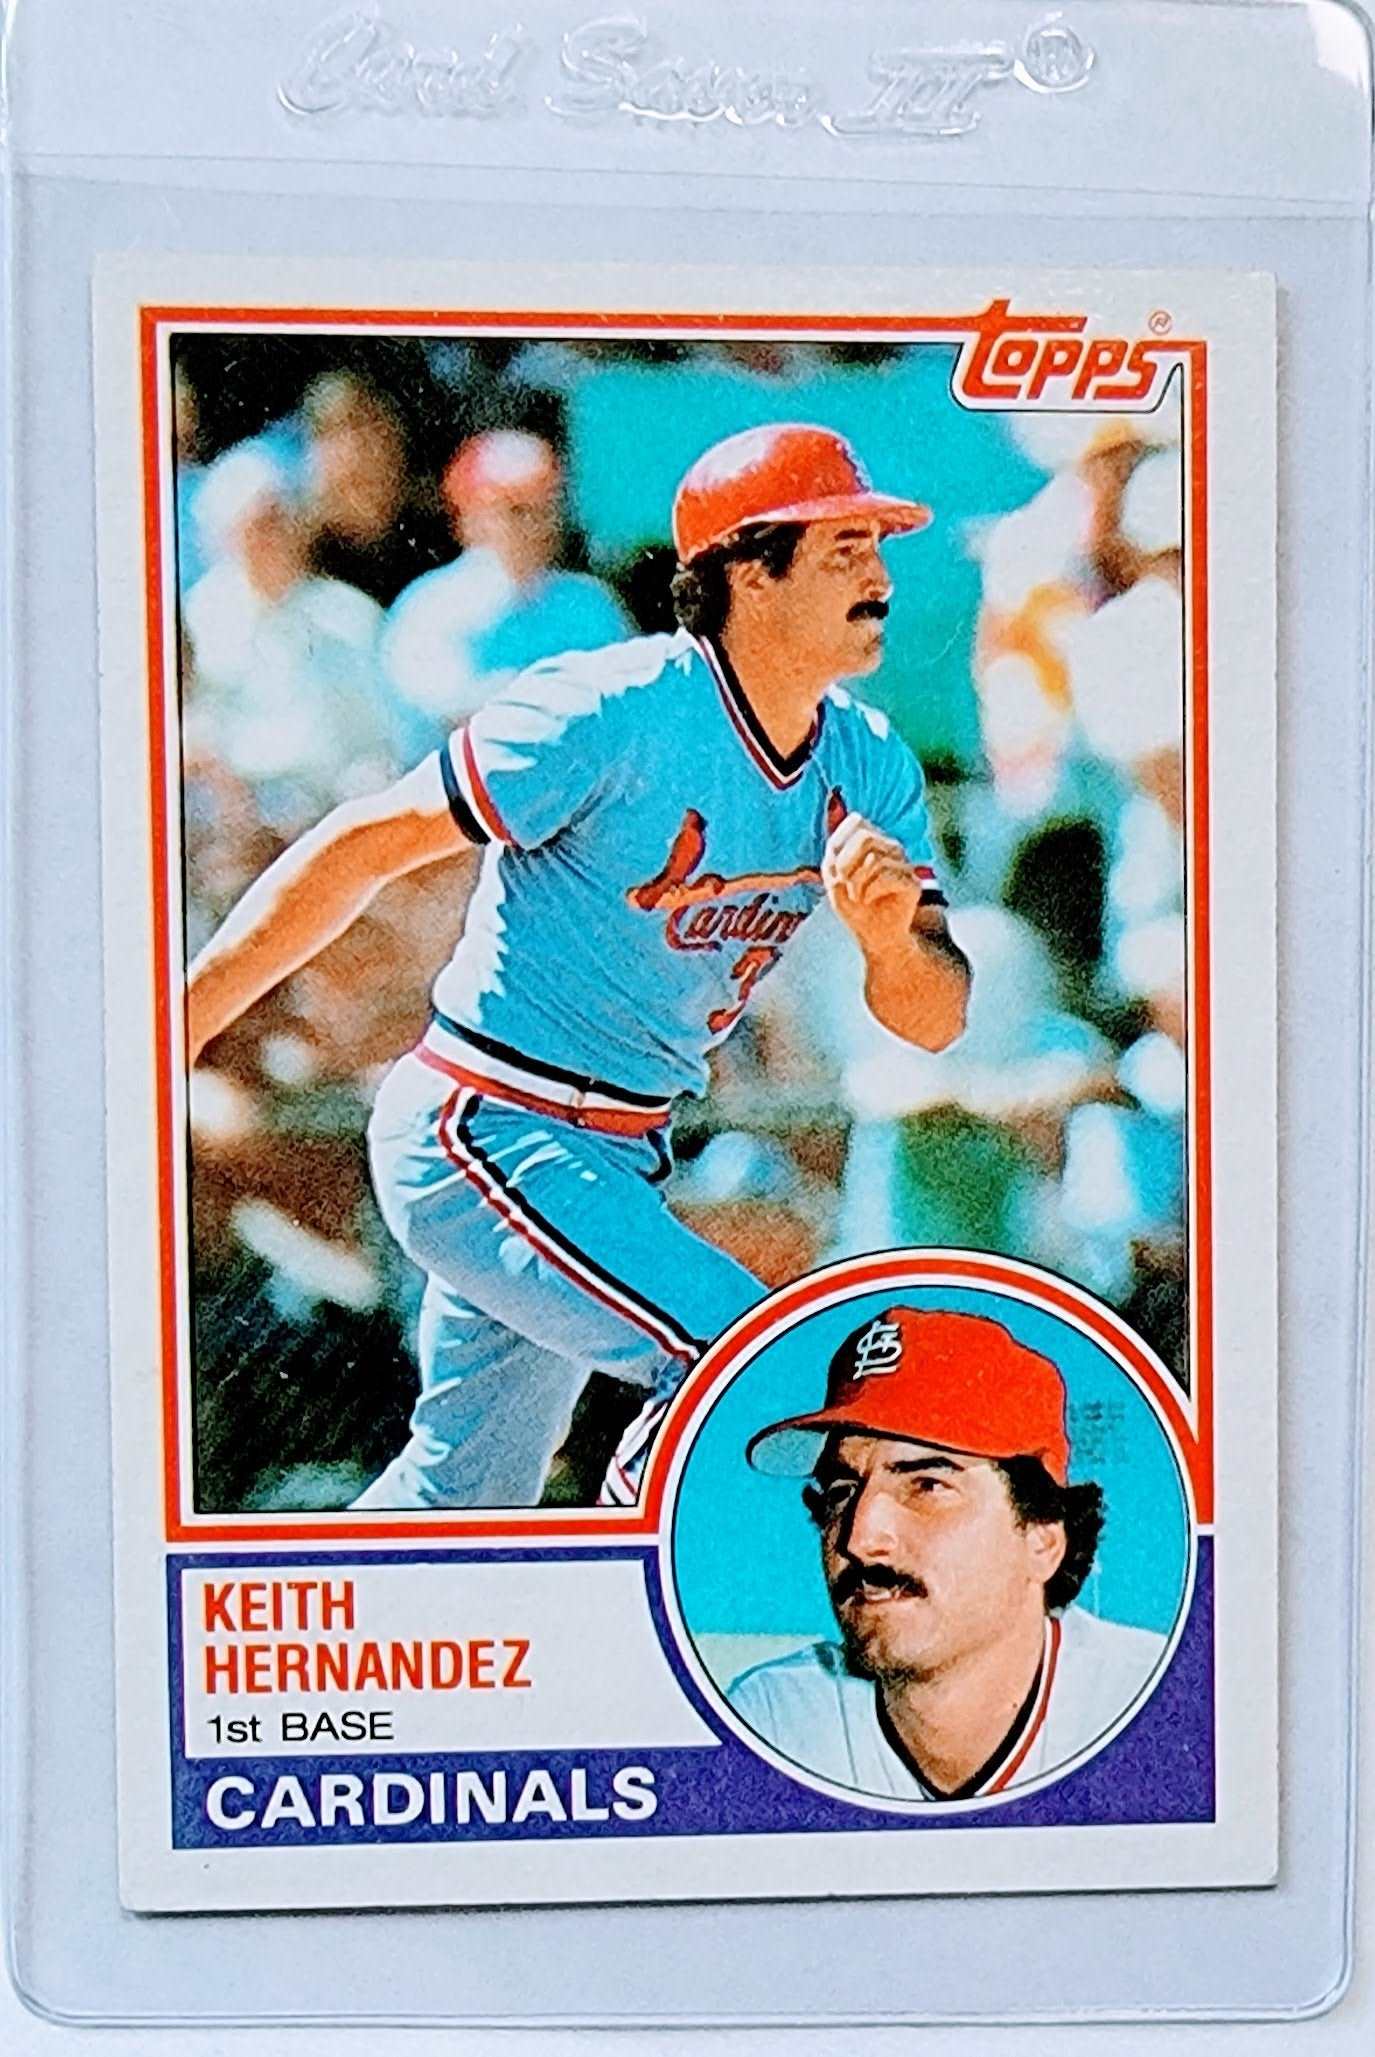 1983 Topps Keith Hernandez Baseball Trading Card TPTV simple Xclusive Collectibles   